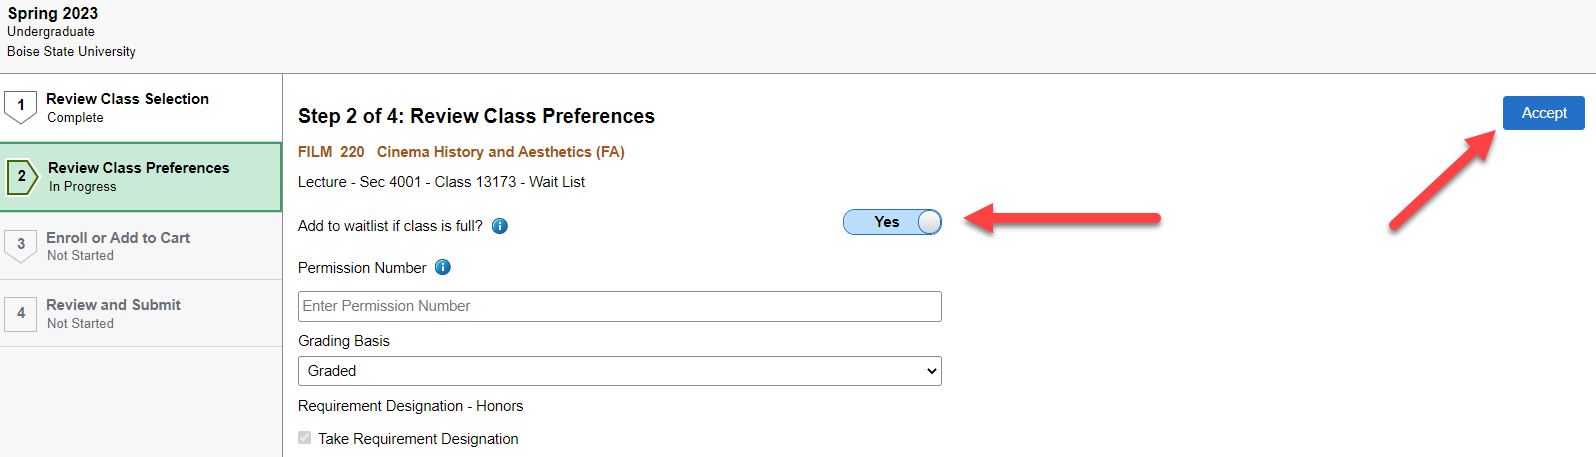 Change "add to waitlist" to yes and select accept